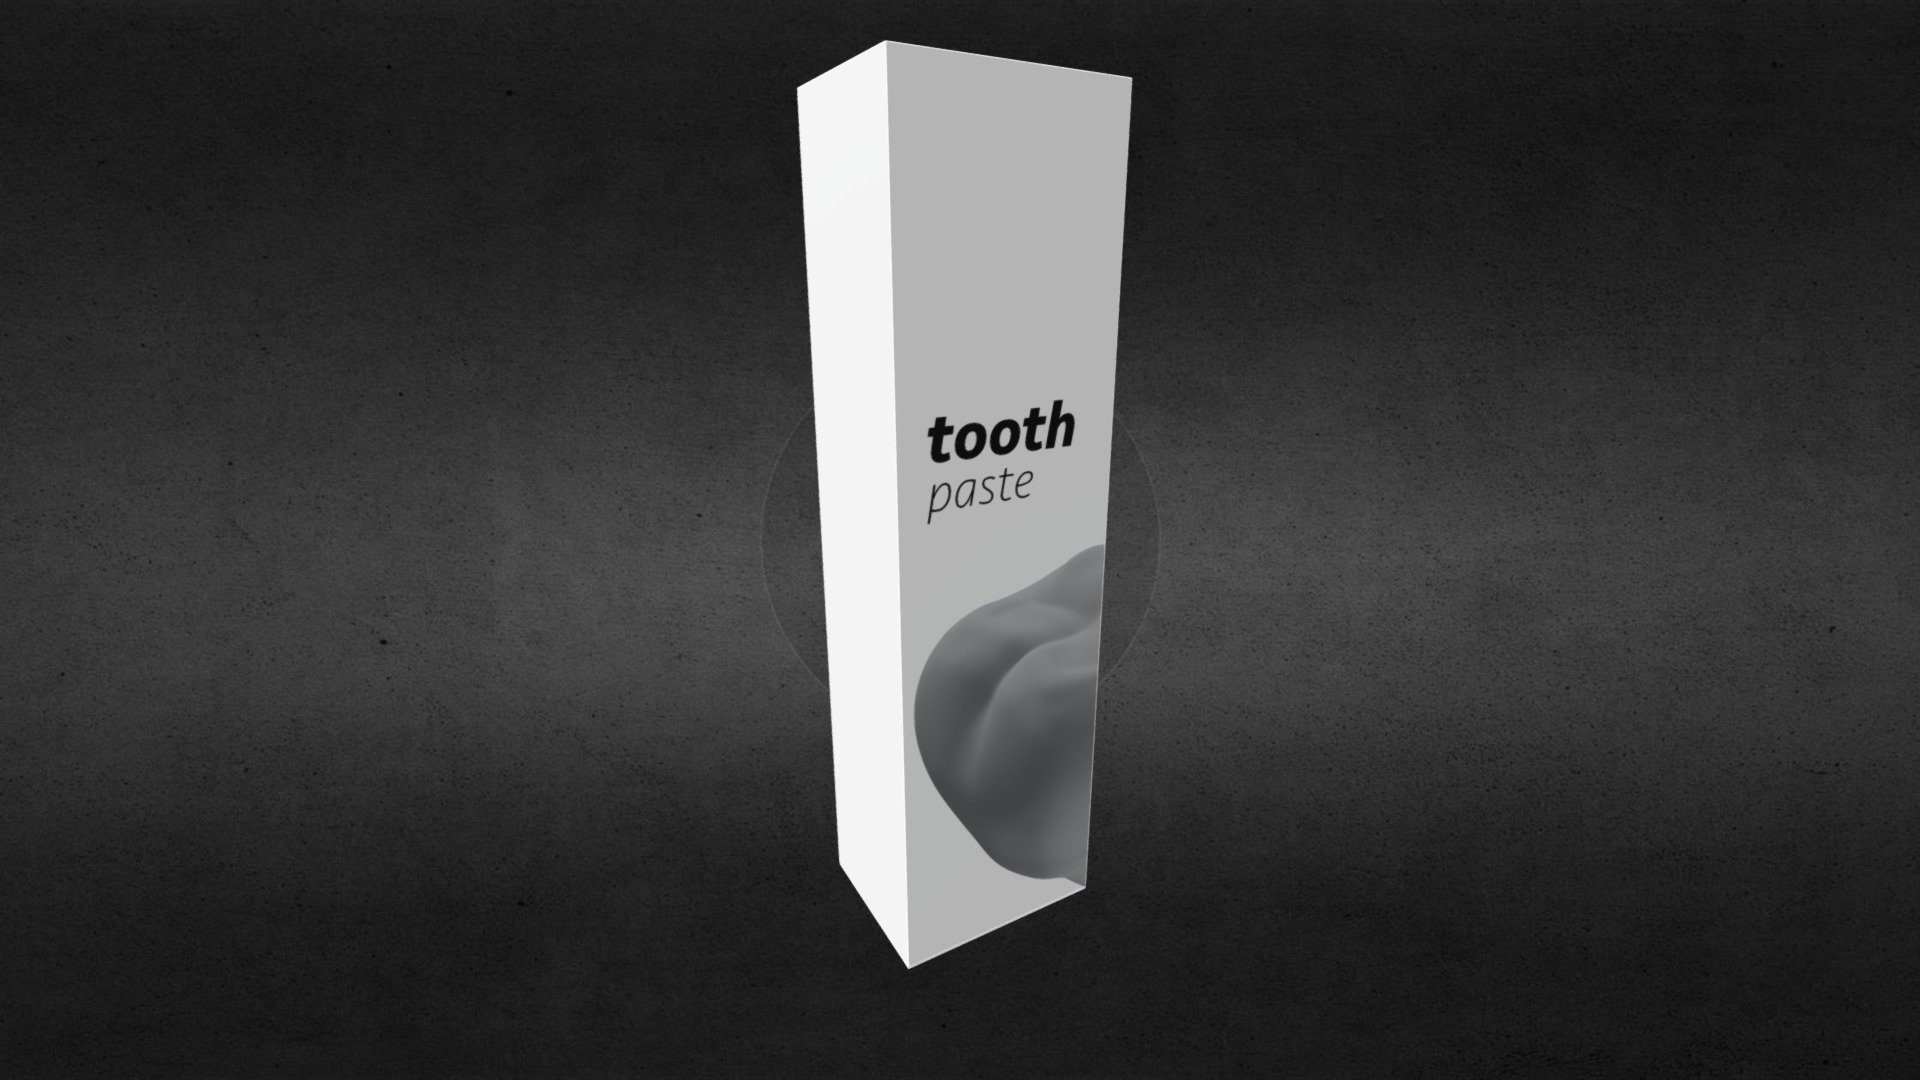 Tooth paste box